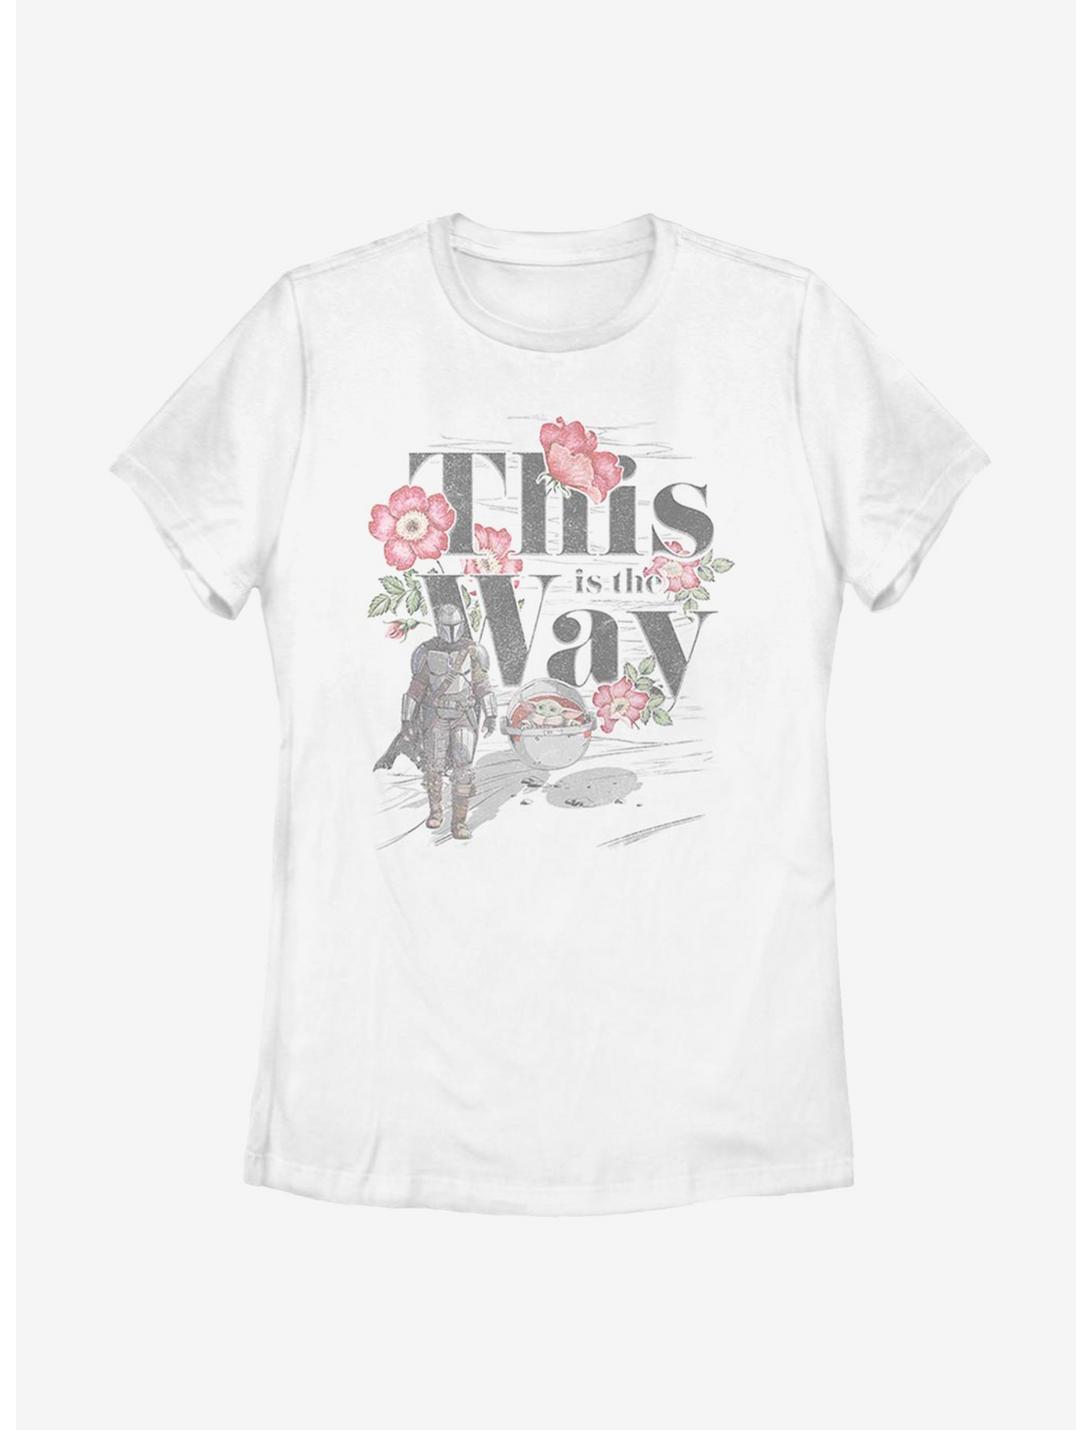 Star Wars The Mandalorian The Child Way Floral Womens T-Shirt, WHITE, hi-res